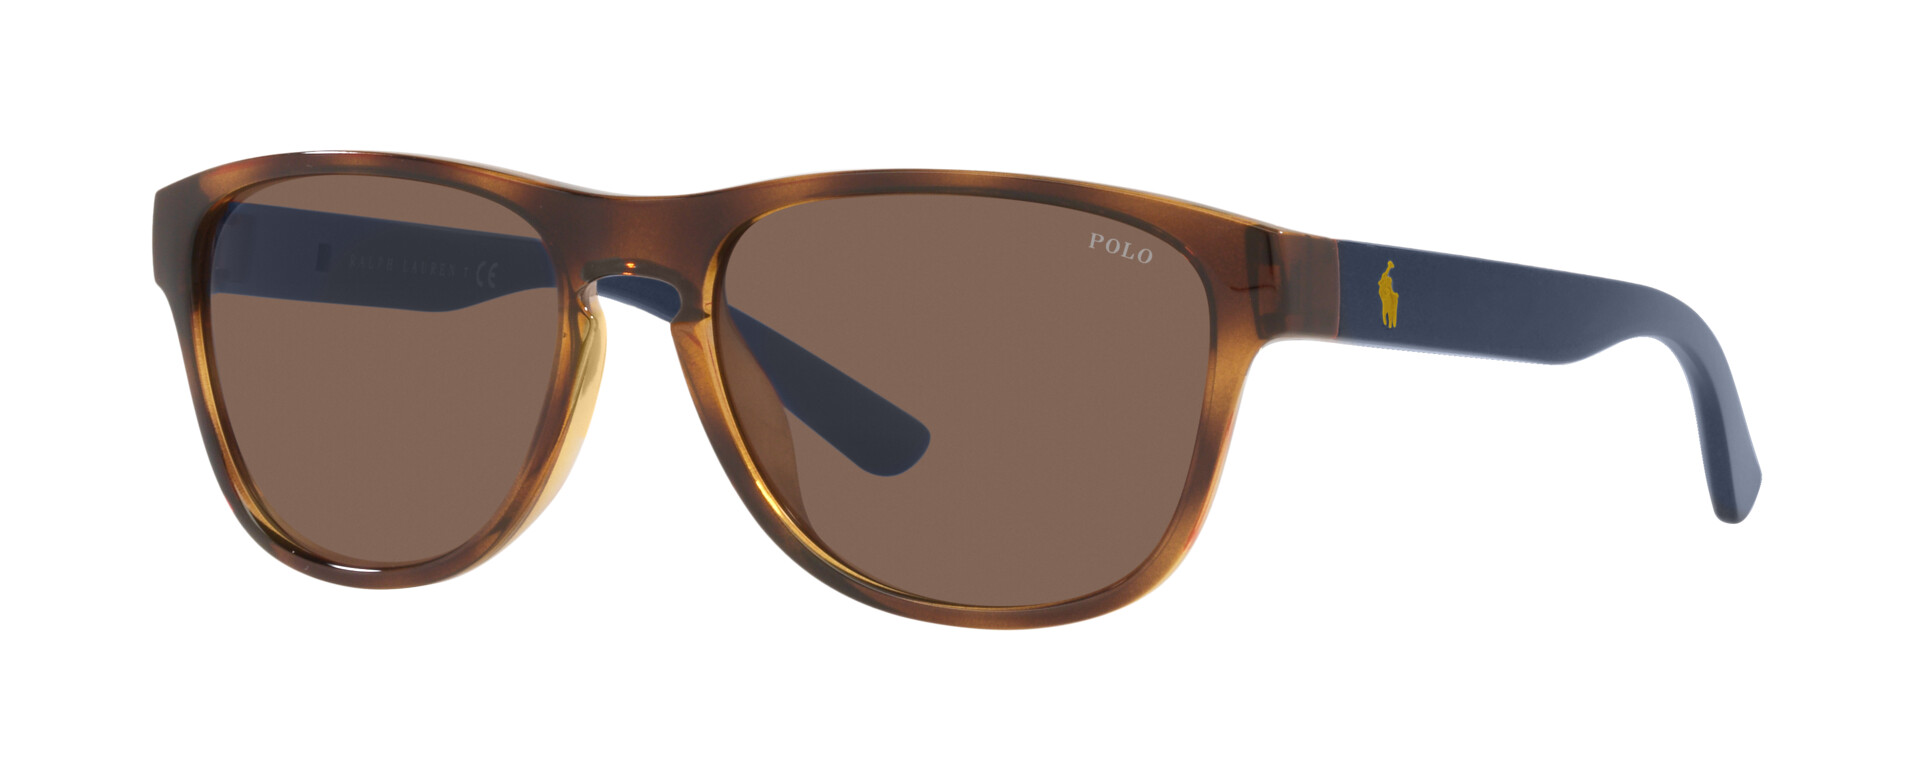 [products.image.angle_left01] Polo Ralph Lauren 0PH4180U 500373 Sonnenbrille